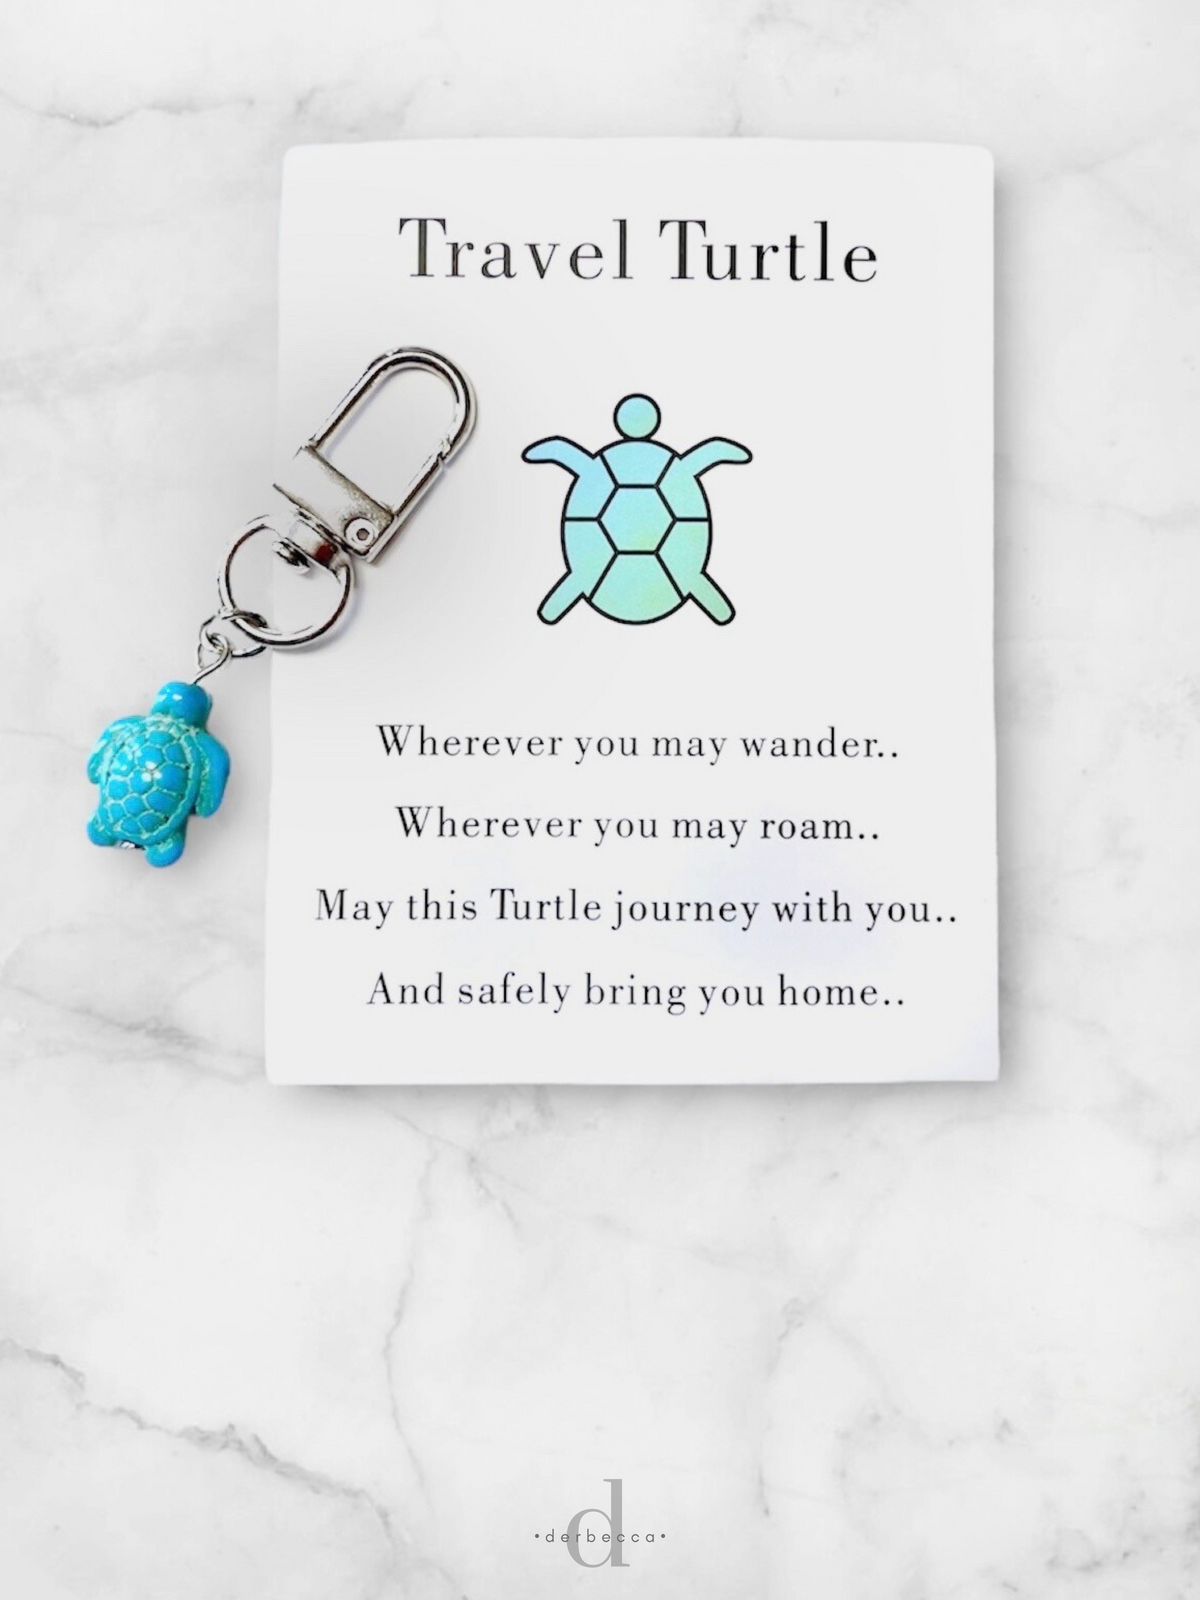 Travel Turtle Mini Keychain Bag Charm Zipper Pull Clip Charm Turquoise Turtle with Poem Saying Card included: Wherever you may wander.. Wherever you may roam.. May this Turtle journey with you.. And safely bring you home.